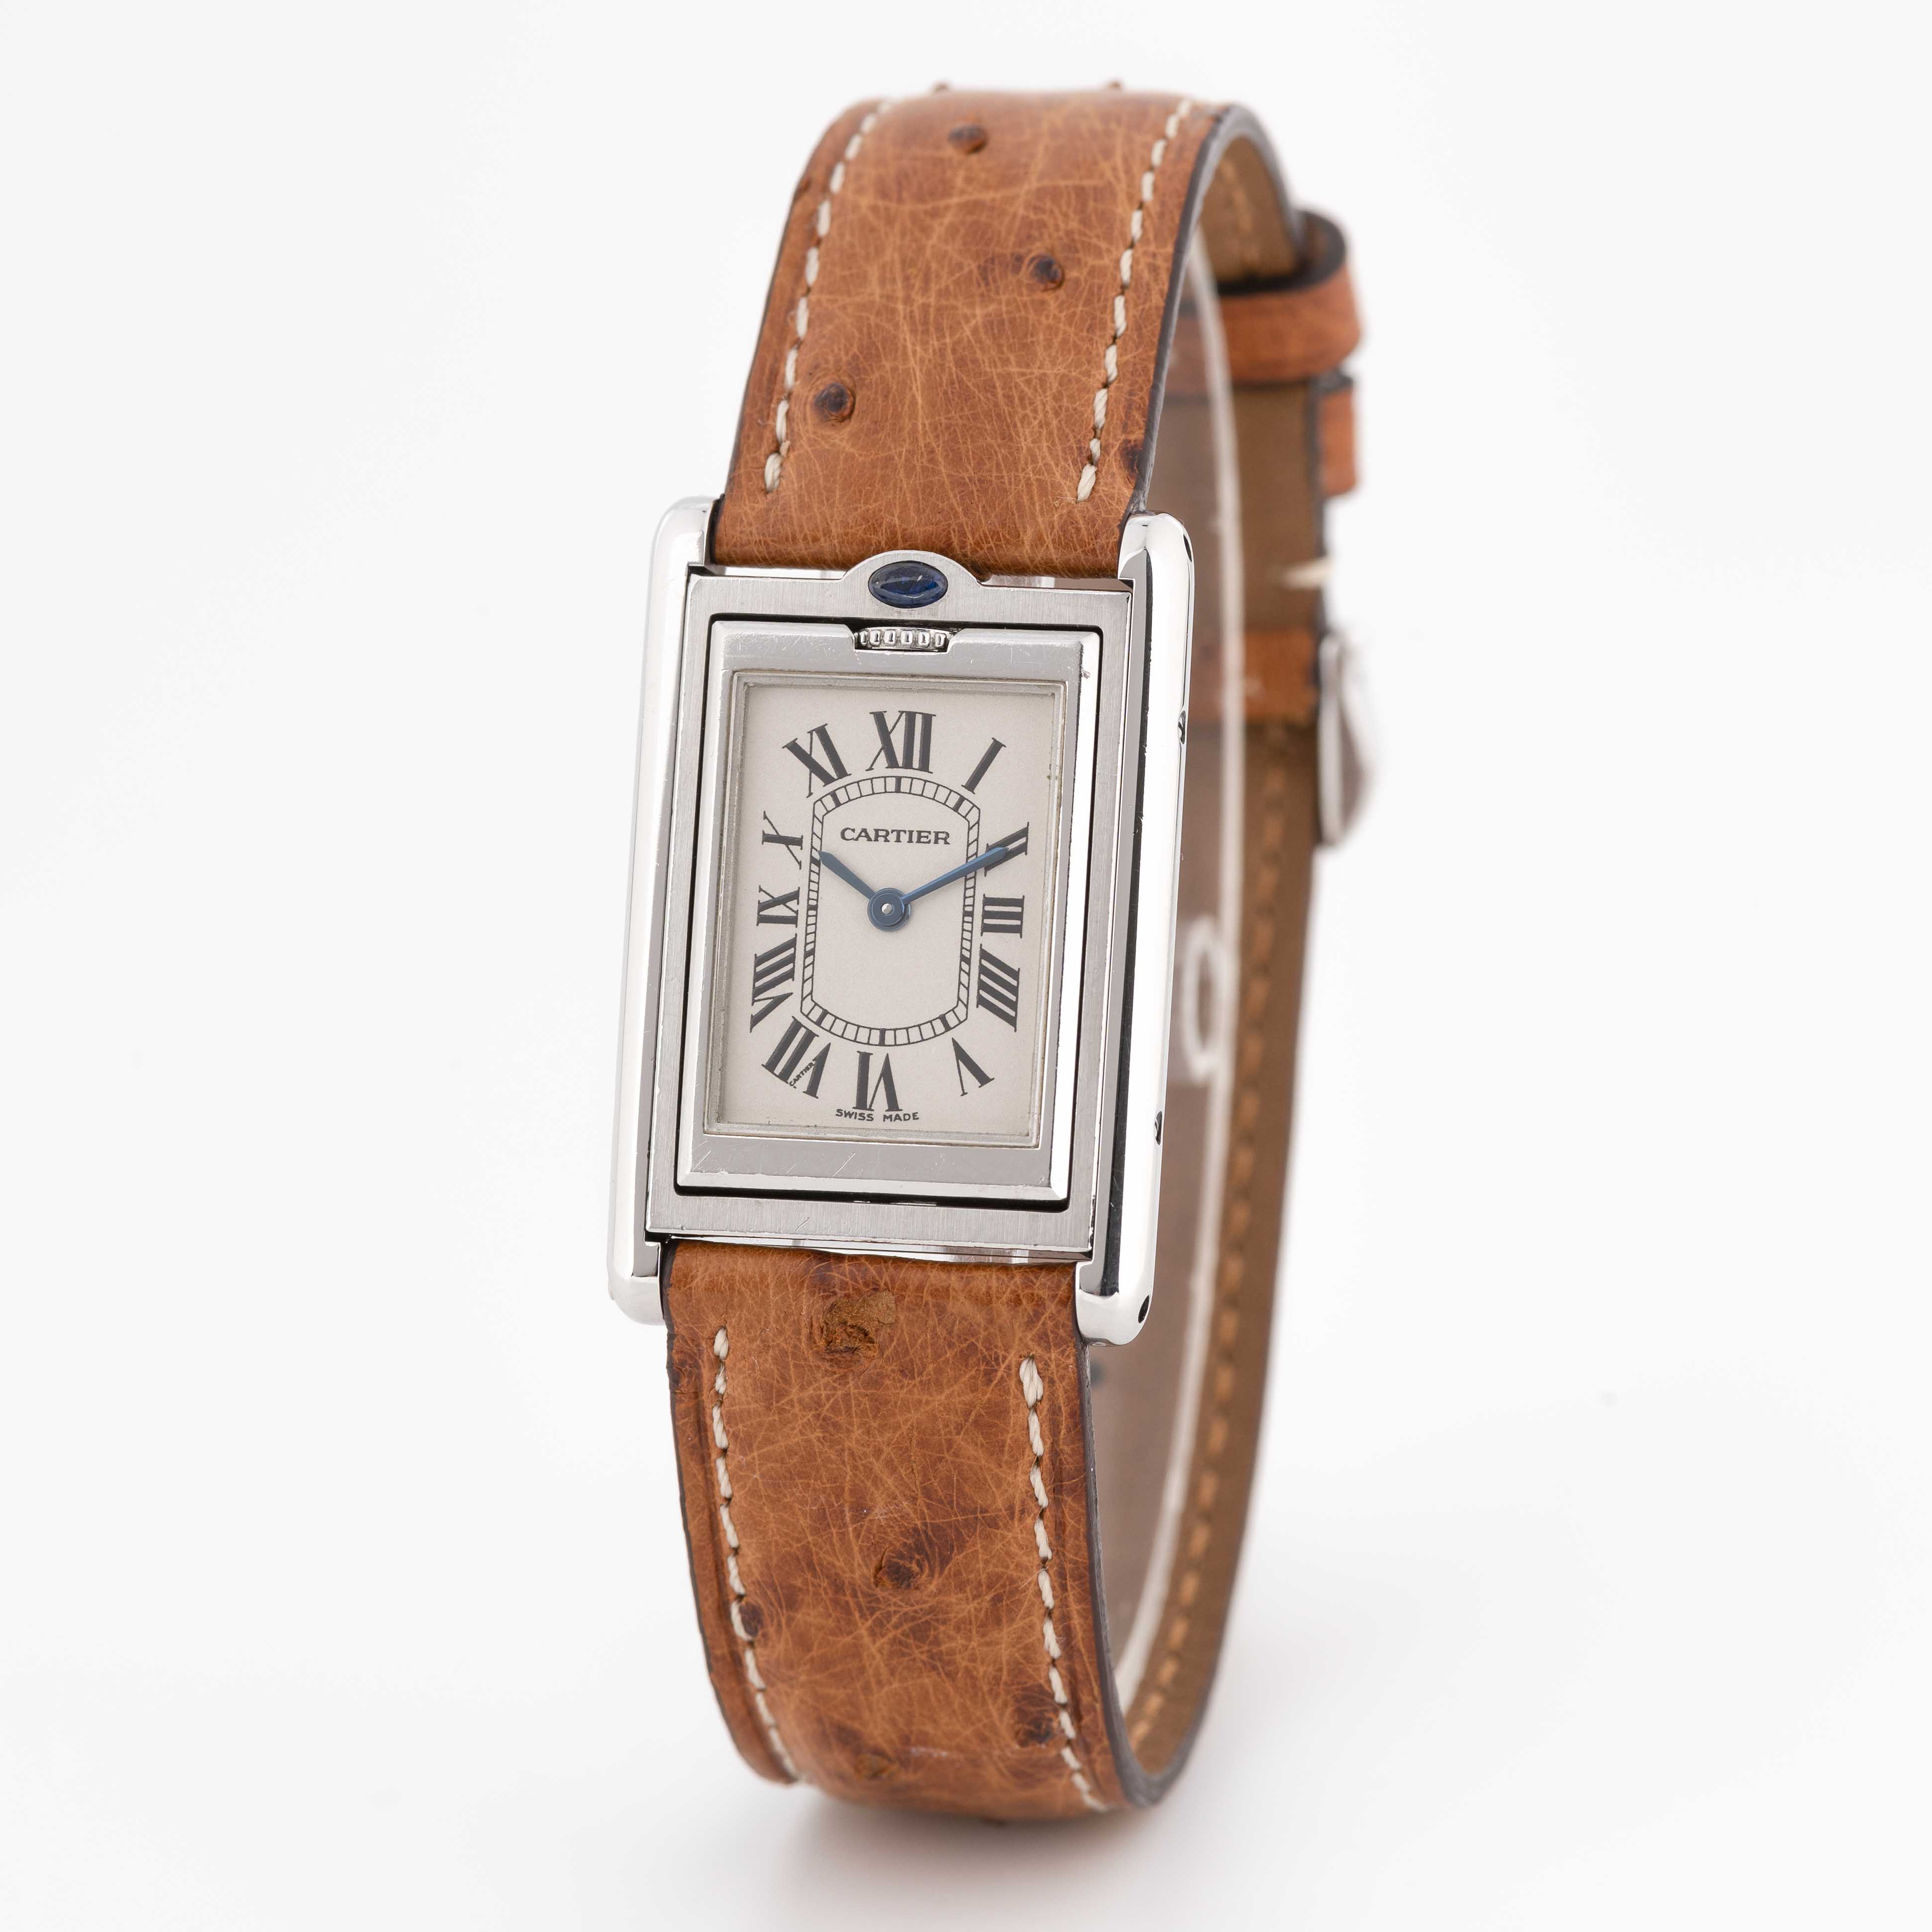 A GENTLEMAN'S SIZE STAINLESS STEEL CARTIER TANK BASCULANTE WRIST WATCH CIRCA 2000s, REF. 2405 - Image 4 of 10